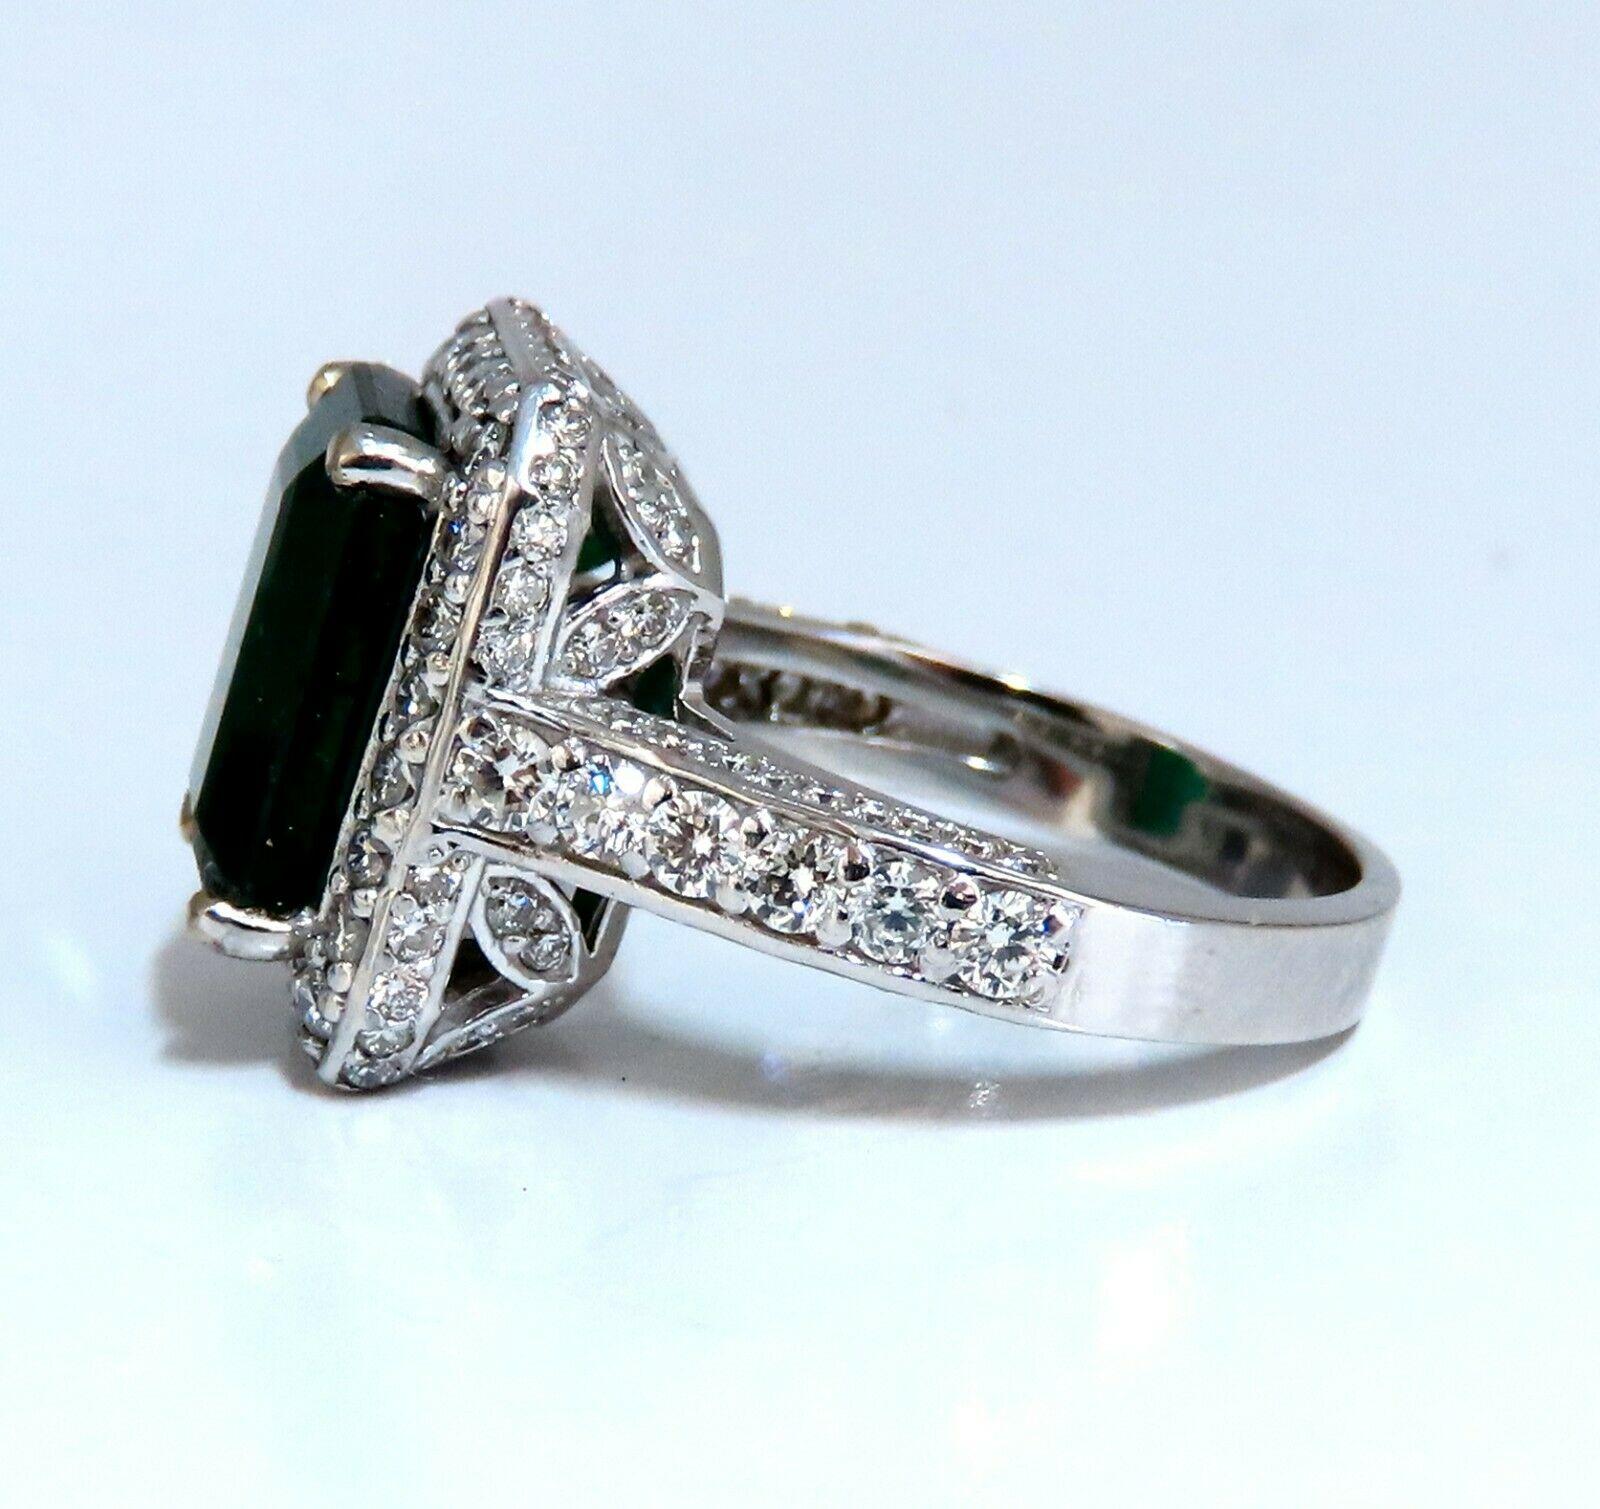 Halo Mod Vivid Green.

4.12ct. Natural Emerald Ring

Emerald cut Brilliant 

11.8 x 8.4mm 

Transparent & Vivid Green 

1.40ct. Diamonds.

Rounds & full cuts 

G-color Vs-2 clarity.  

14kt. white gold

7.5 grams

Ring Current size: 6.5

Depth of